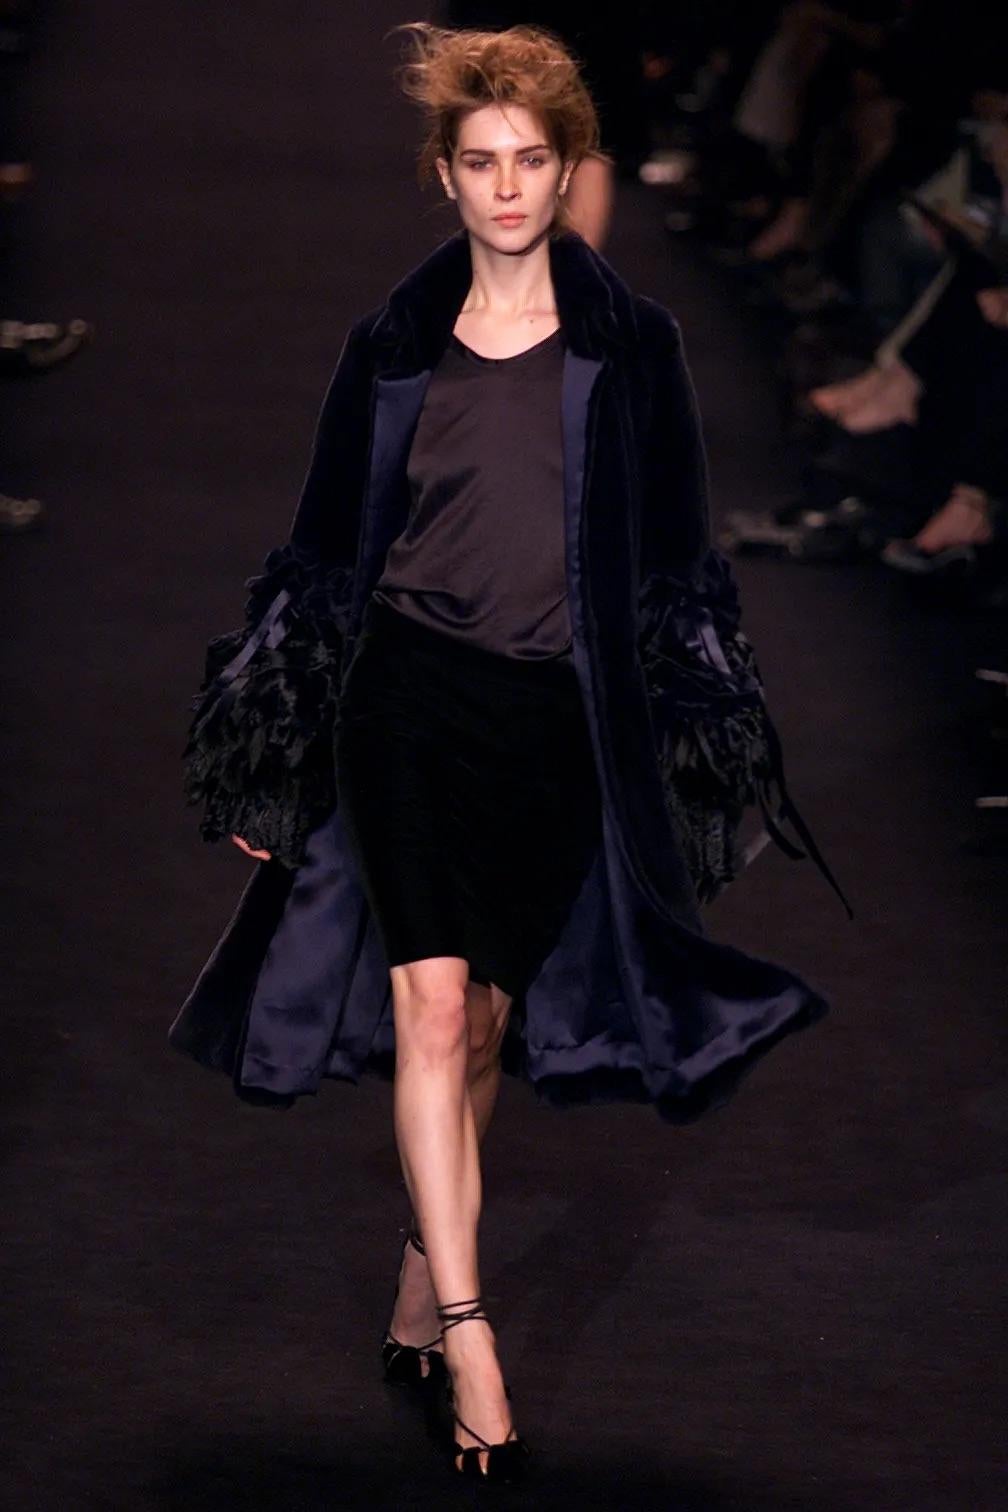 Presenting an incredible black Yves Saint Laurent Rive Gauche fur jacket, designed by Tom Ford. From the Fall/Winter 2002 collection, the full-length version of this coat debuted on the season's runway in navy as part of look 29, modeled by Erin